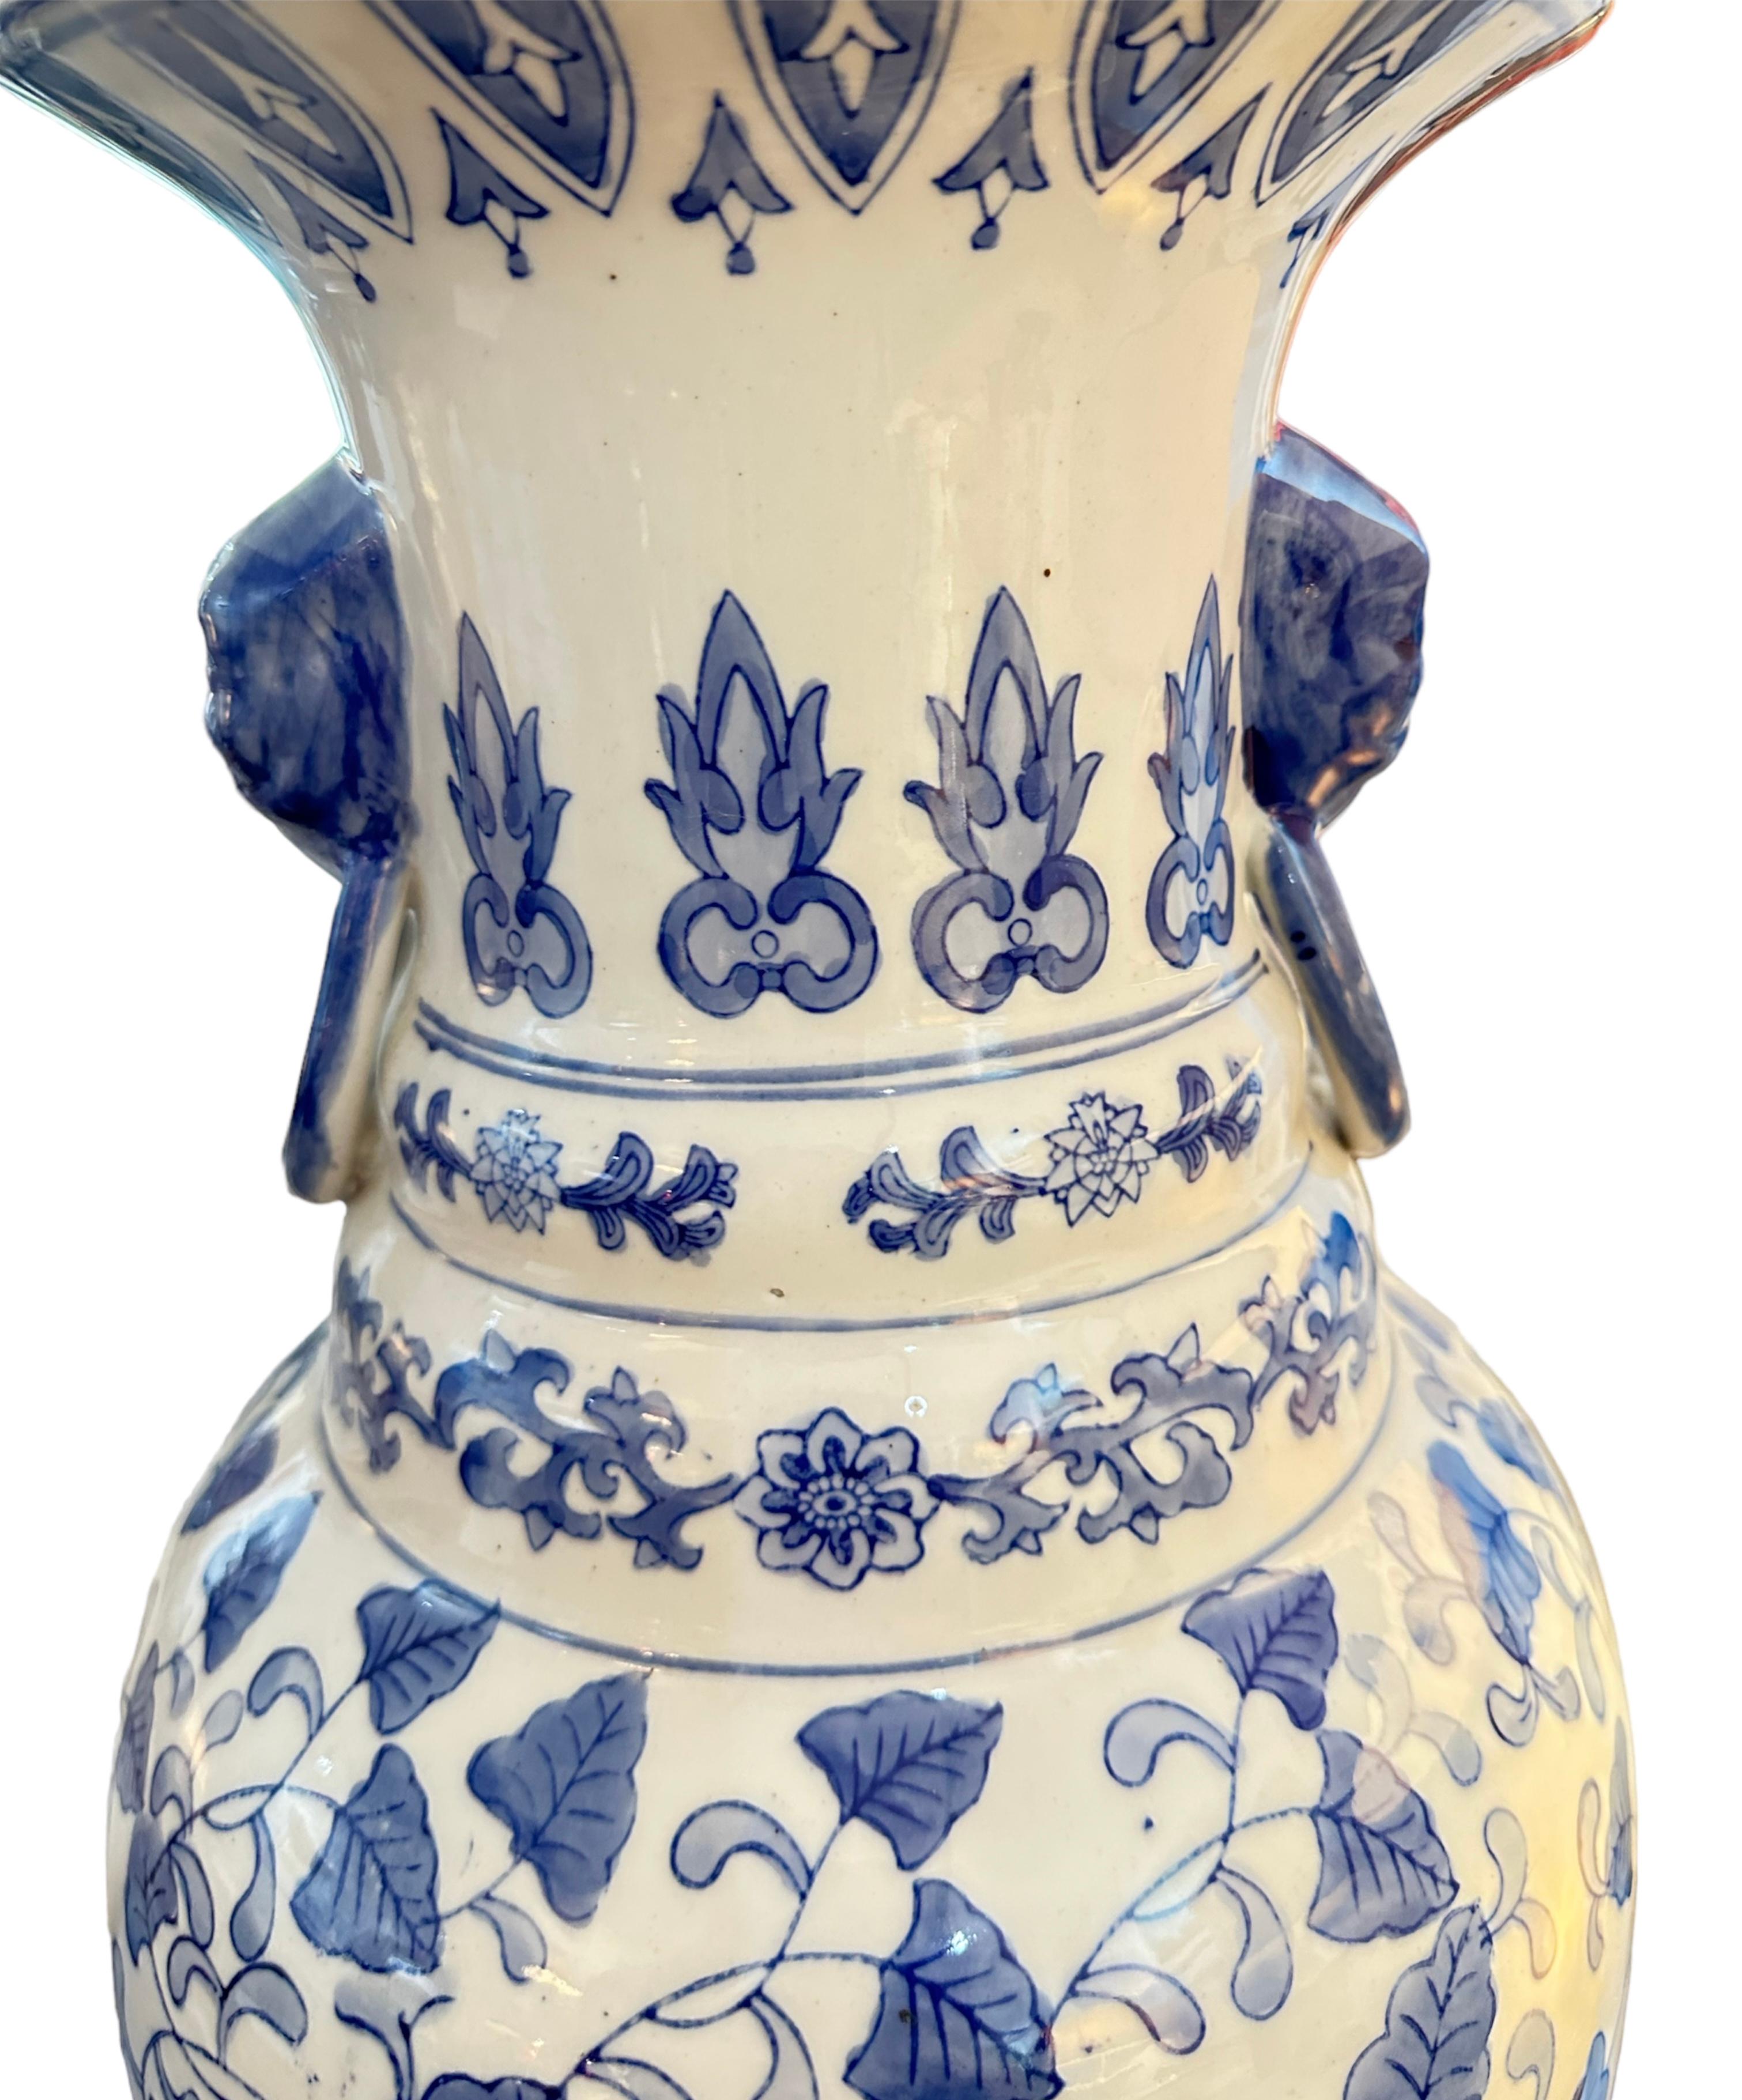 Floor vase, blue and white classic with beautiful flower with vine of leaves covering the body of the vase. More white in person.